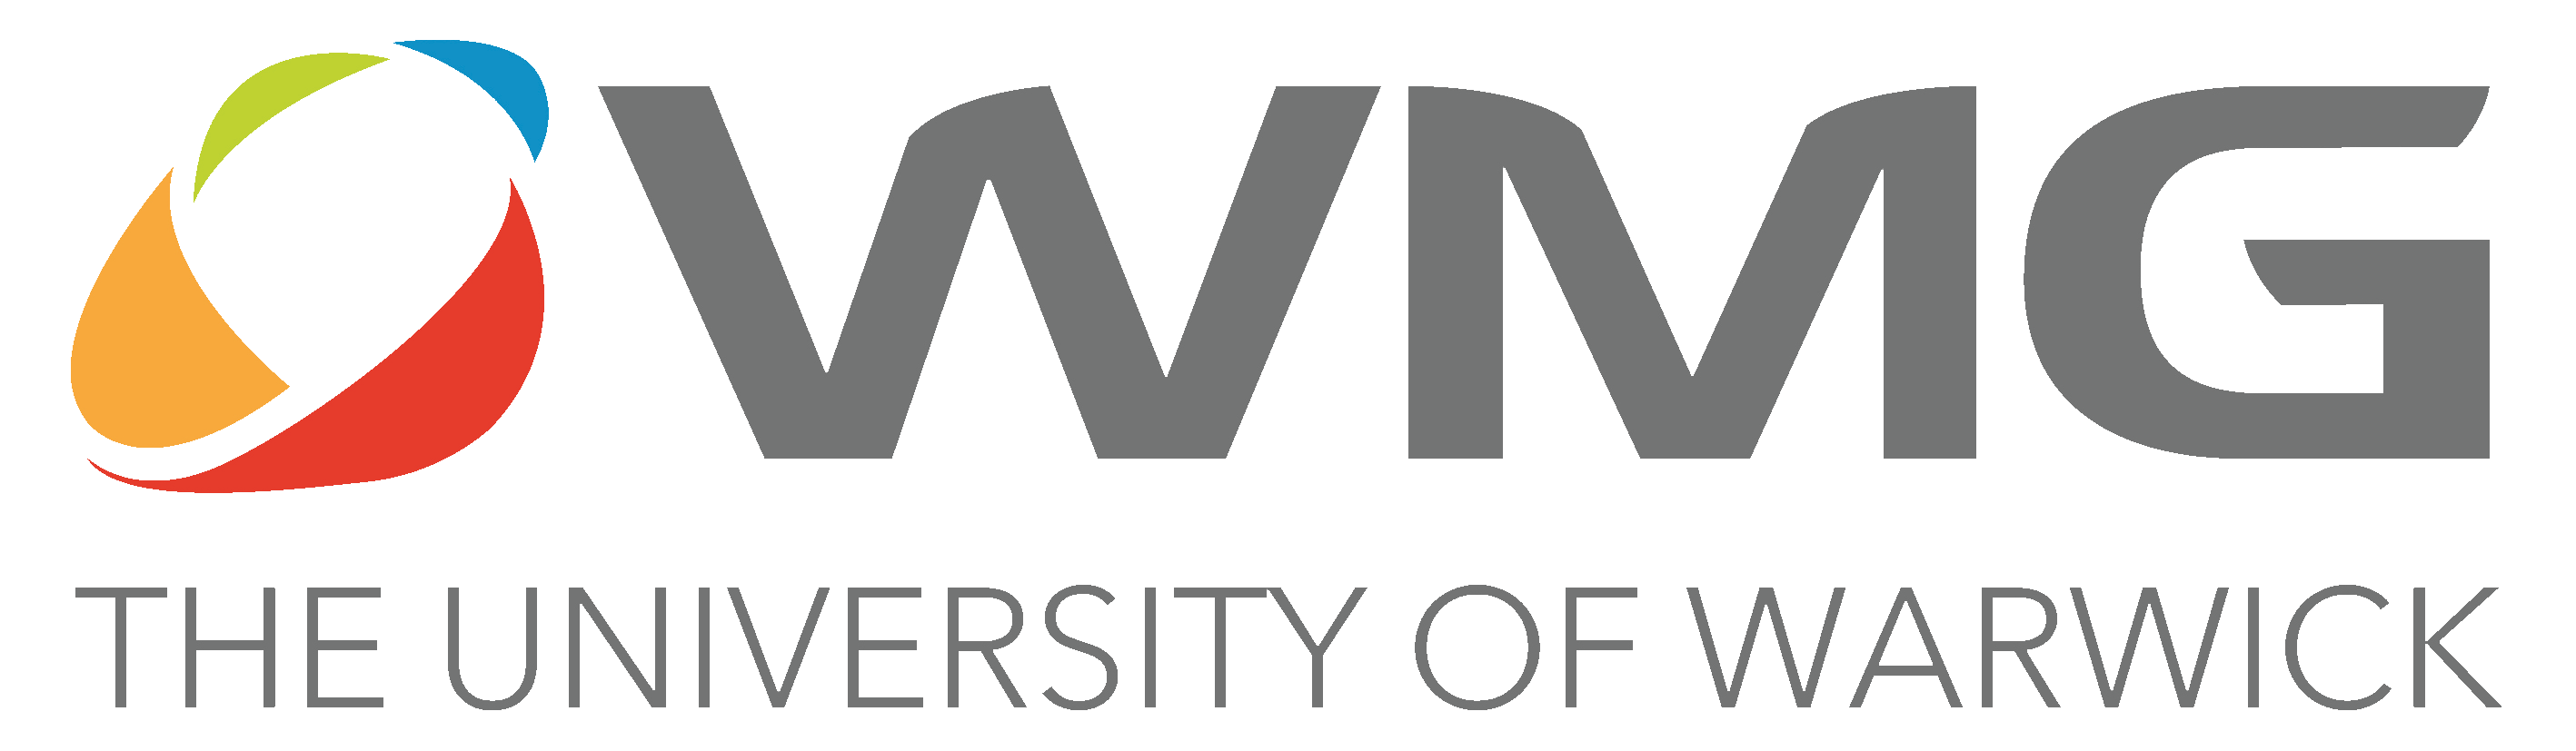 Logo containing words WMG University of Warwick Click on logo to take you to University of Warwick inclusion pages.